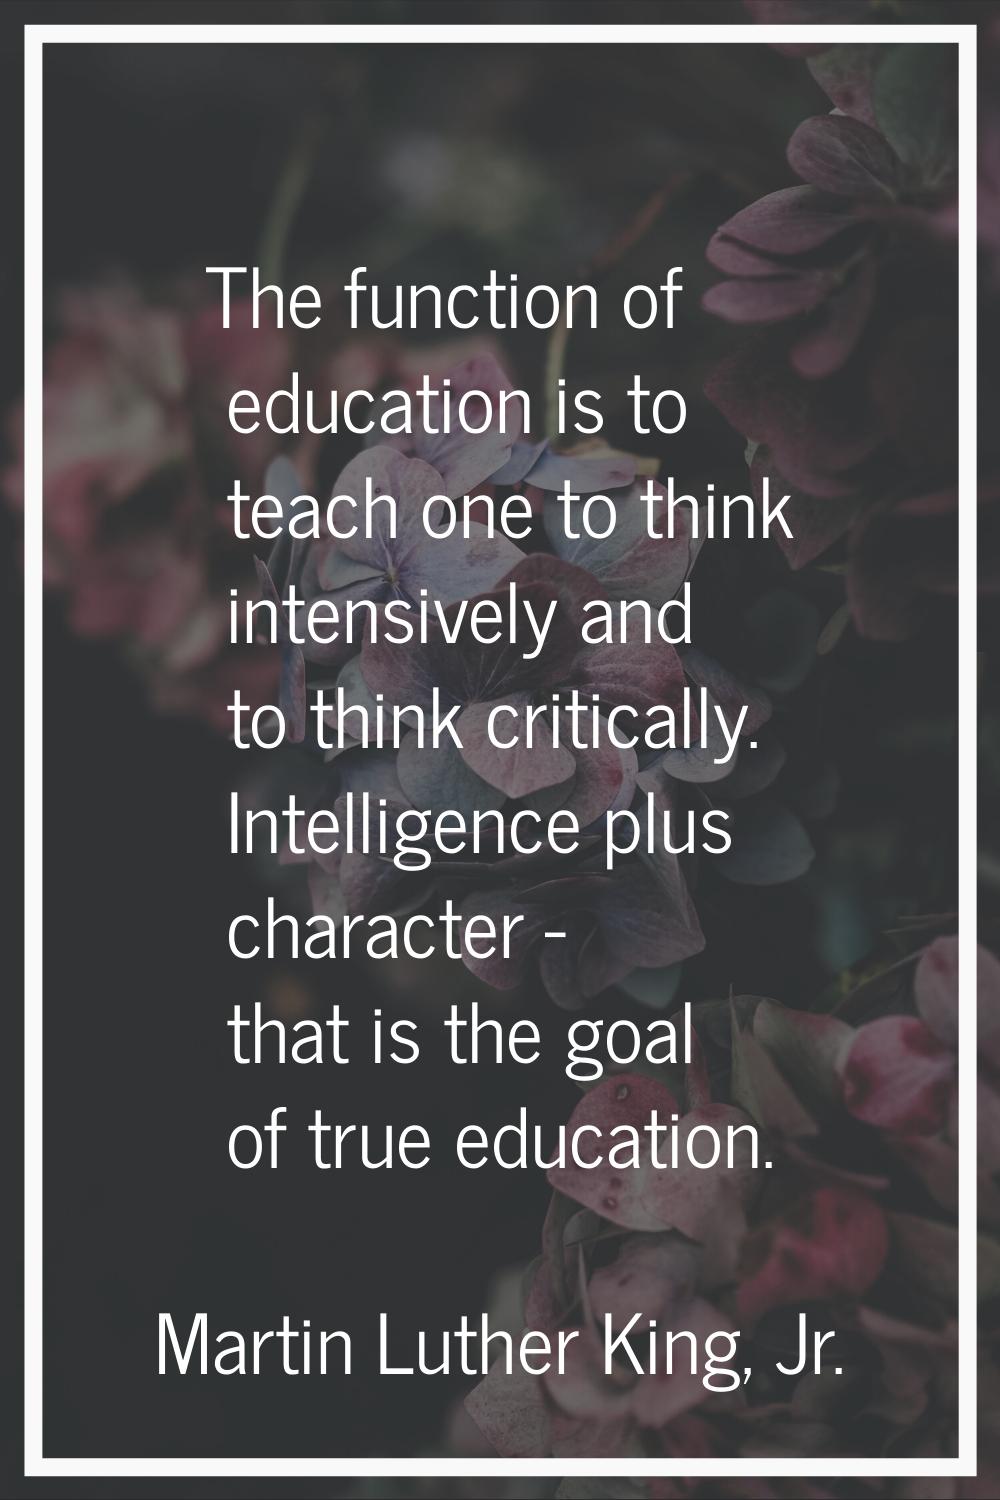 The function of education is to teach one to think intensively and to think critically. Intelligenc